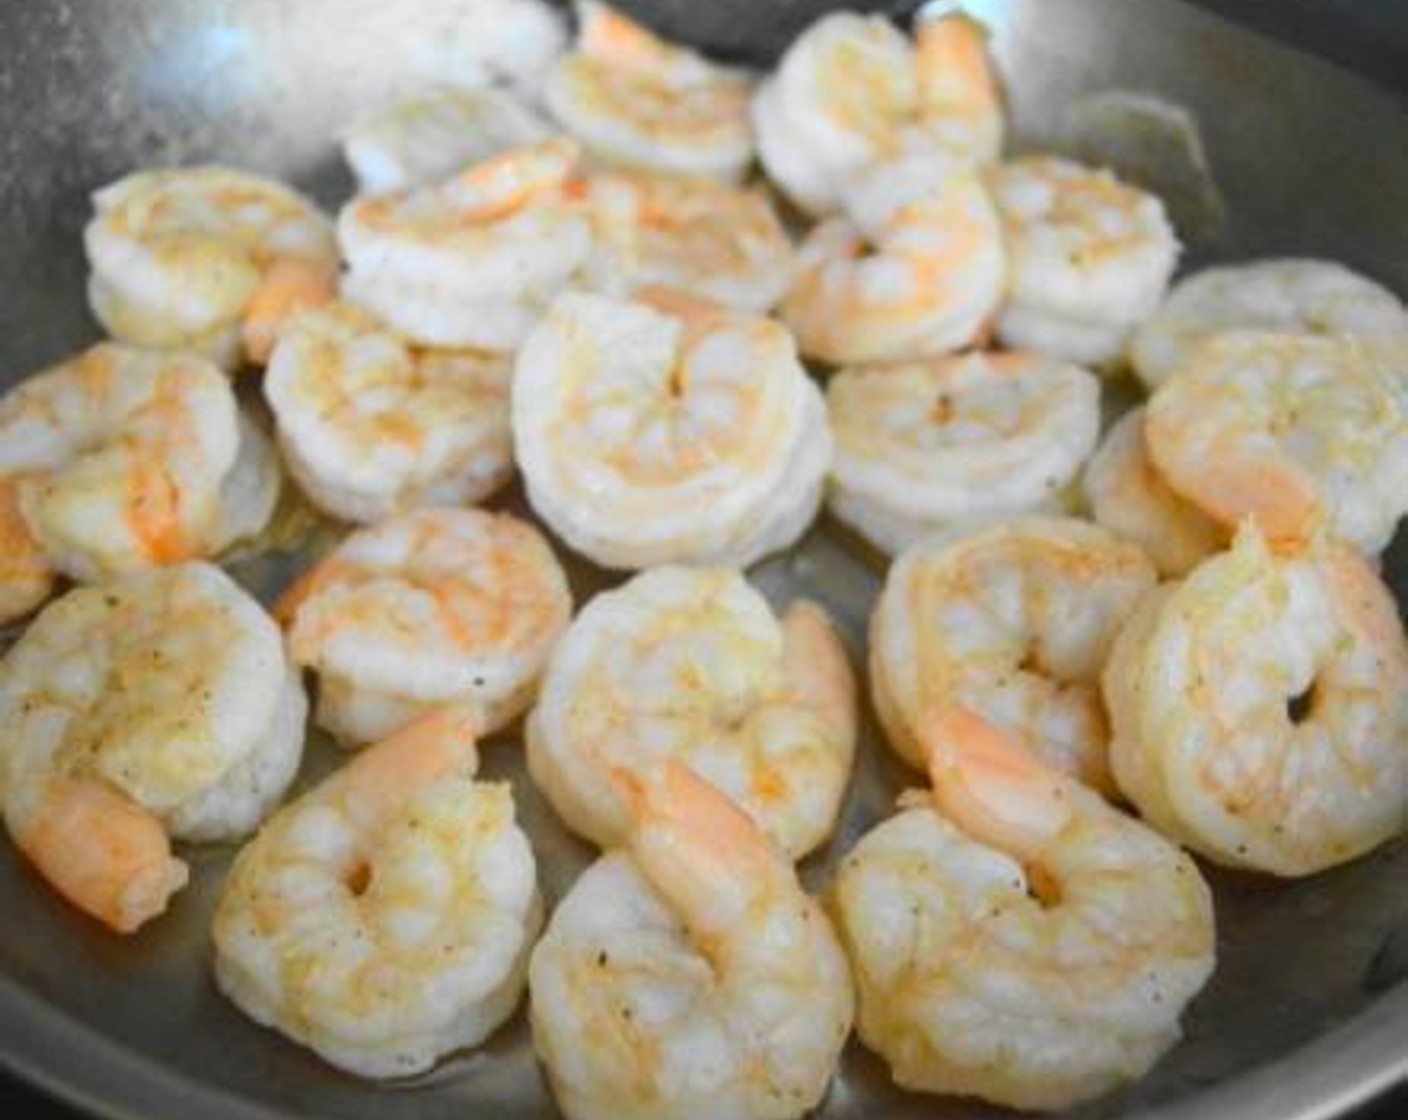 step 5 Cook the Shrimp (2 lb) in the oil just until they are pink and opaque on both sides. It should take about 4-5 minutes. While they cook, season them with the Salt (1 pinch) and Chili Powder (1 pinch) powder. Take the pan off of the heat.